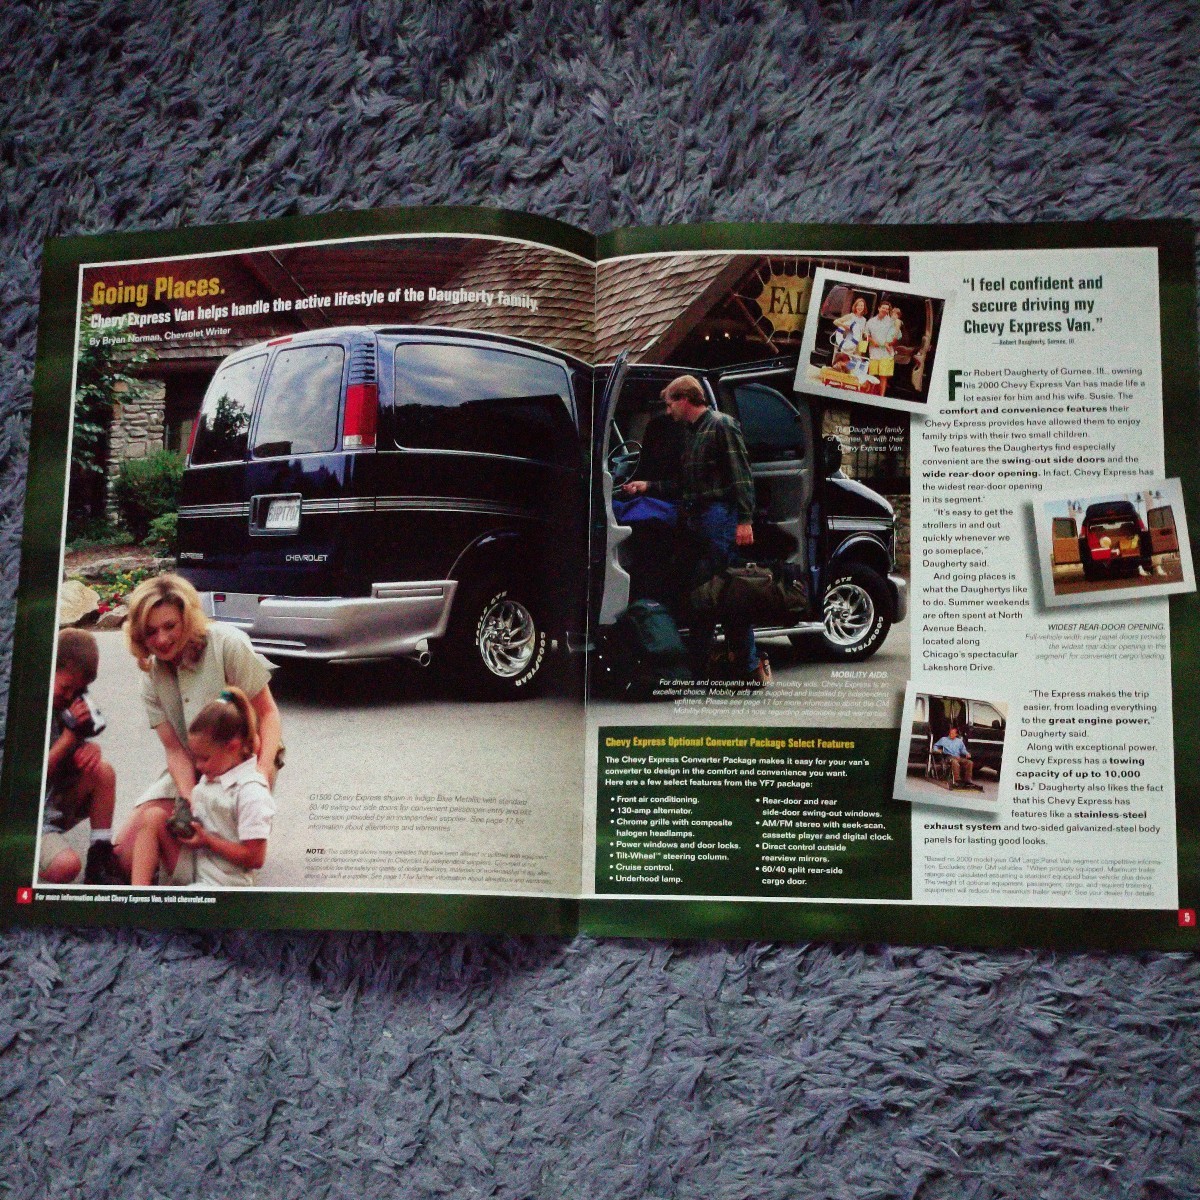  Chevrolet conversion van Chevy Express Astro Chevy RV 2001 year of model 21 page book@ country catalog not yet read goods rare out of print 